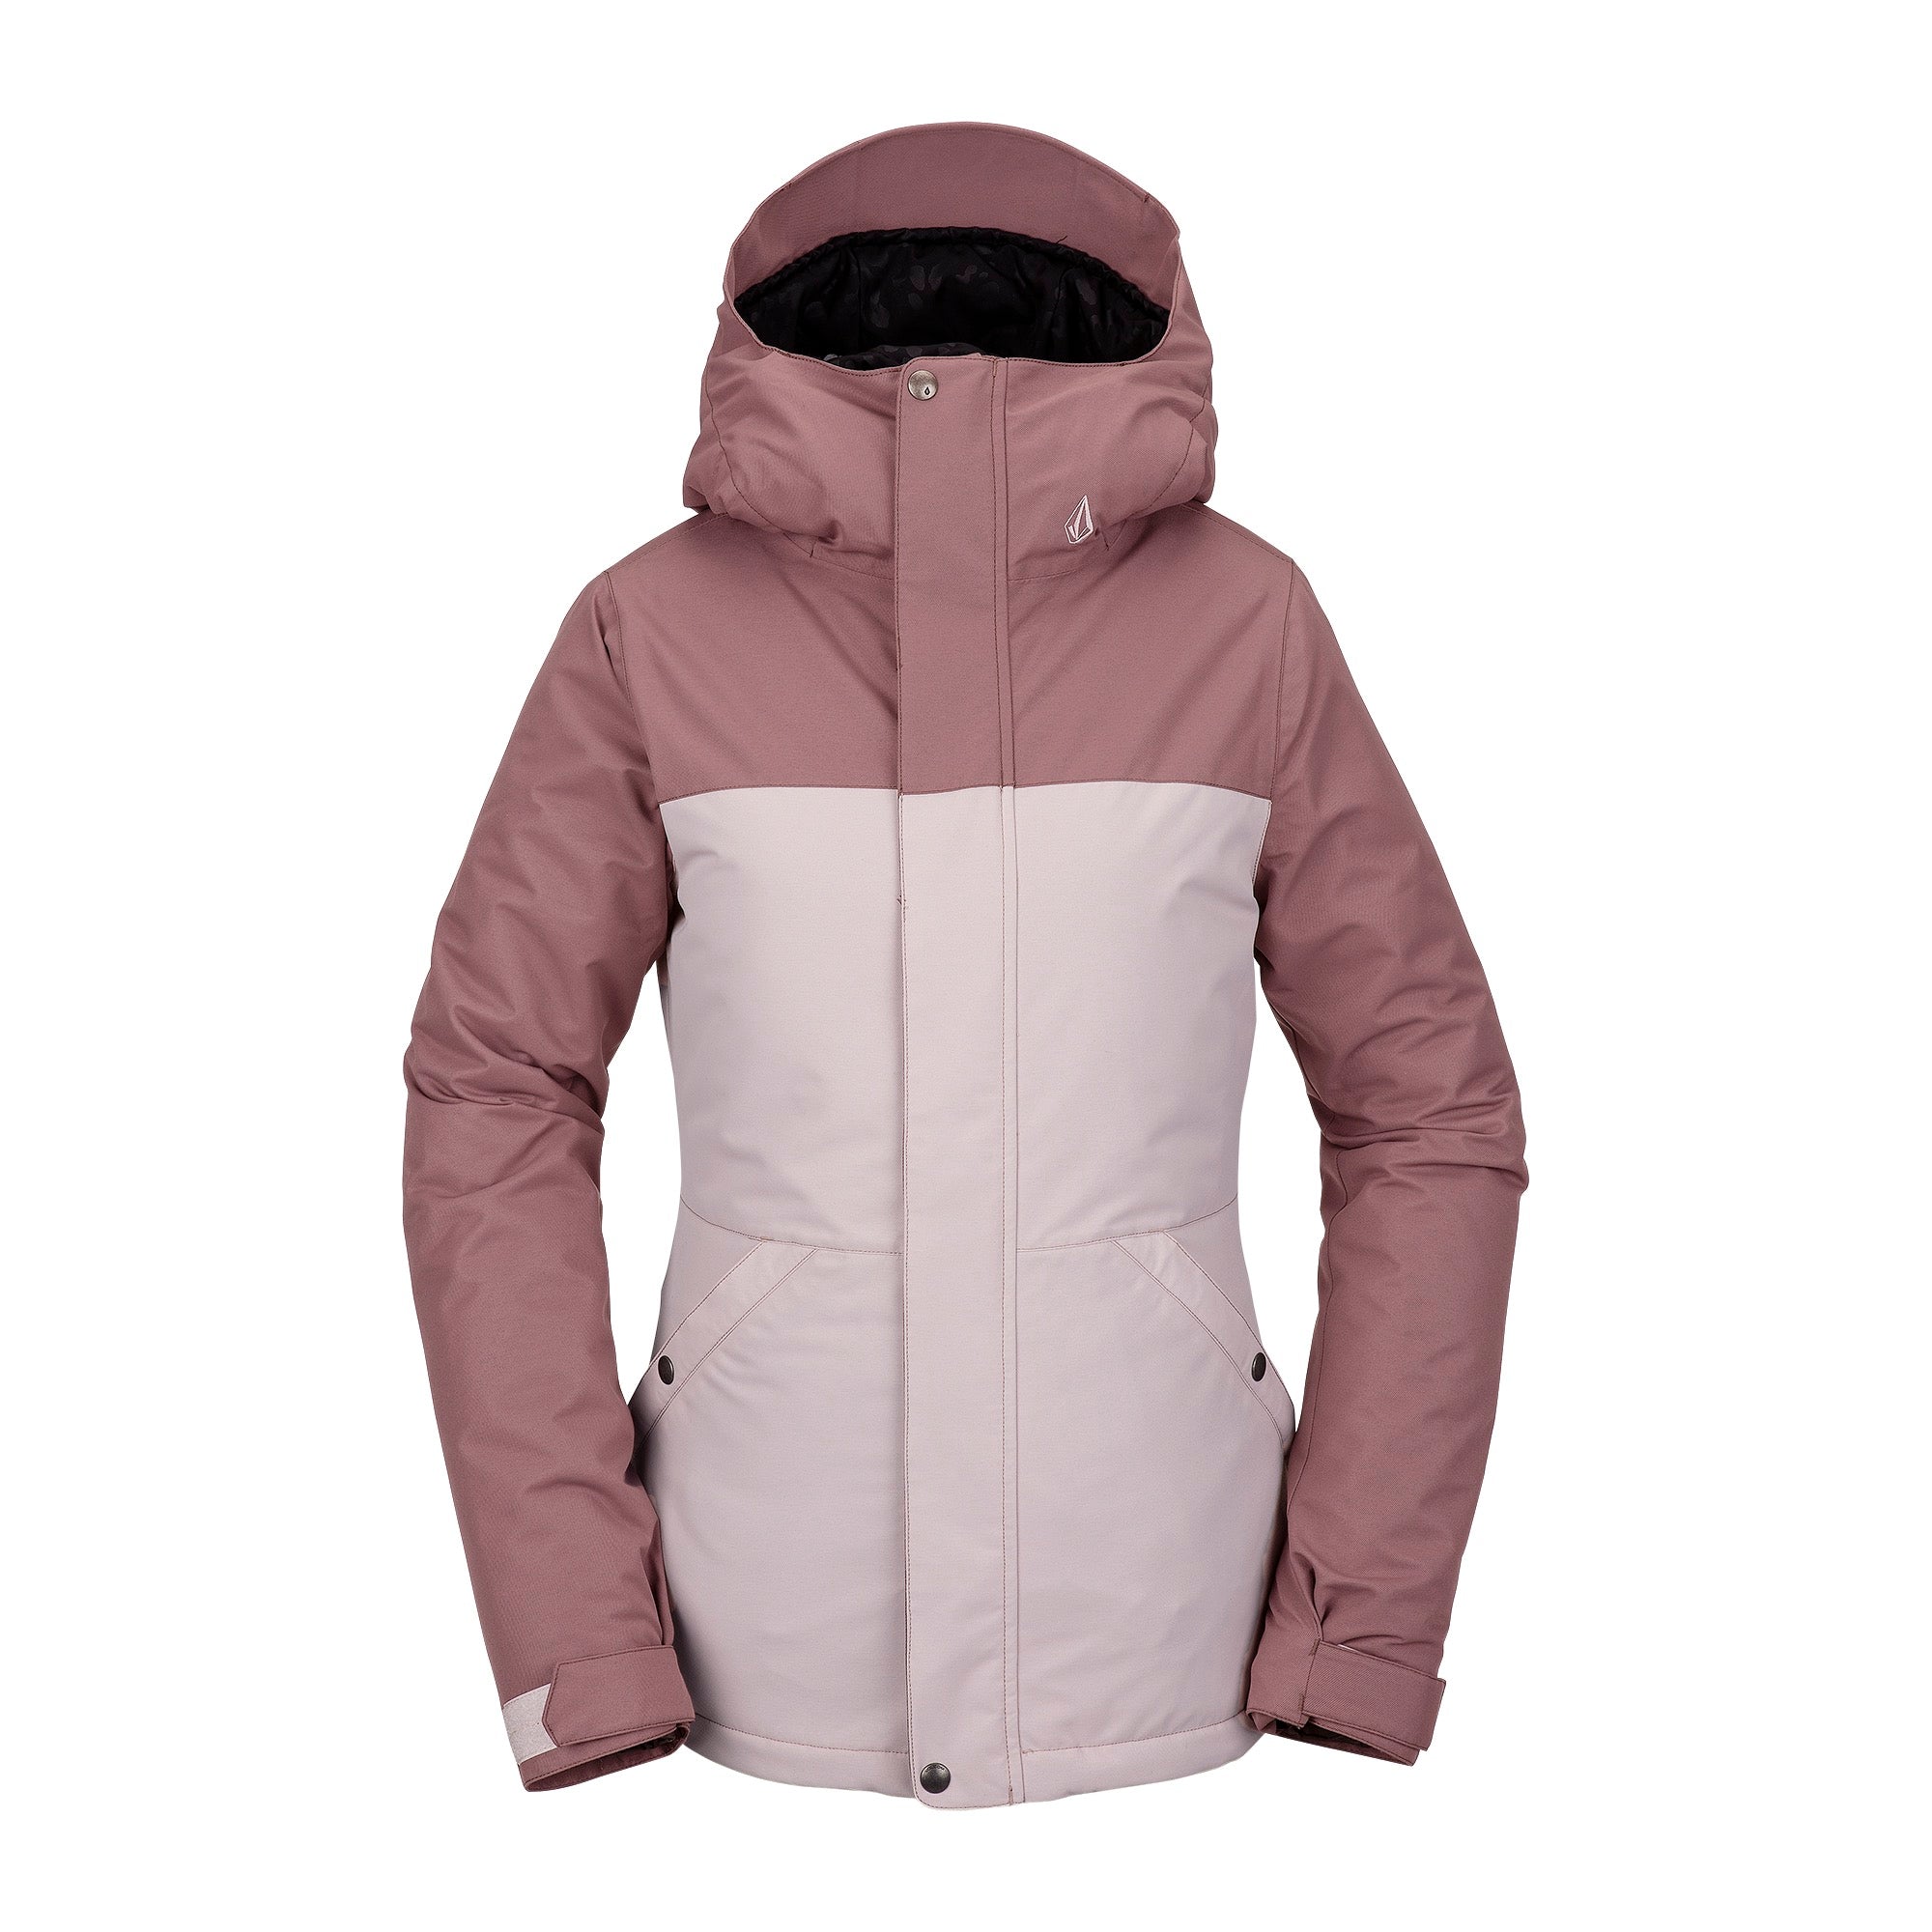 Volvom 2021 - WOMENS BOLT INSULATED JACKET H0452114